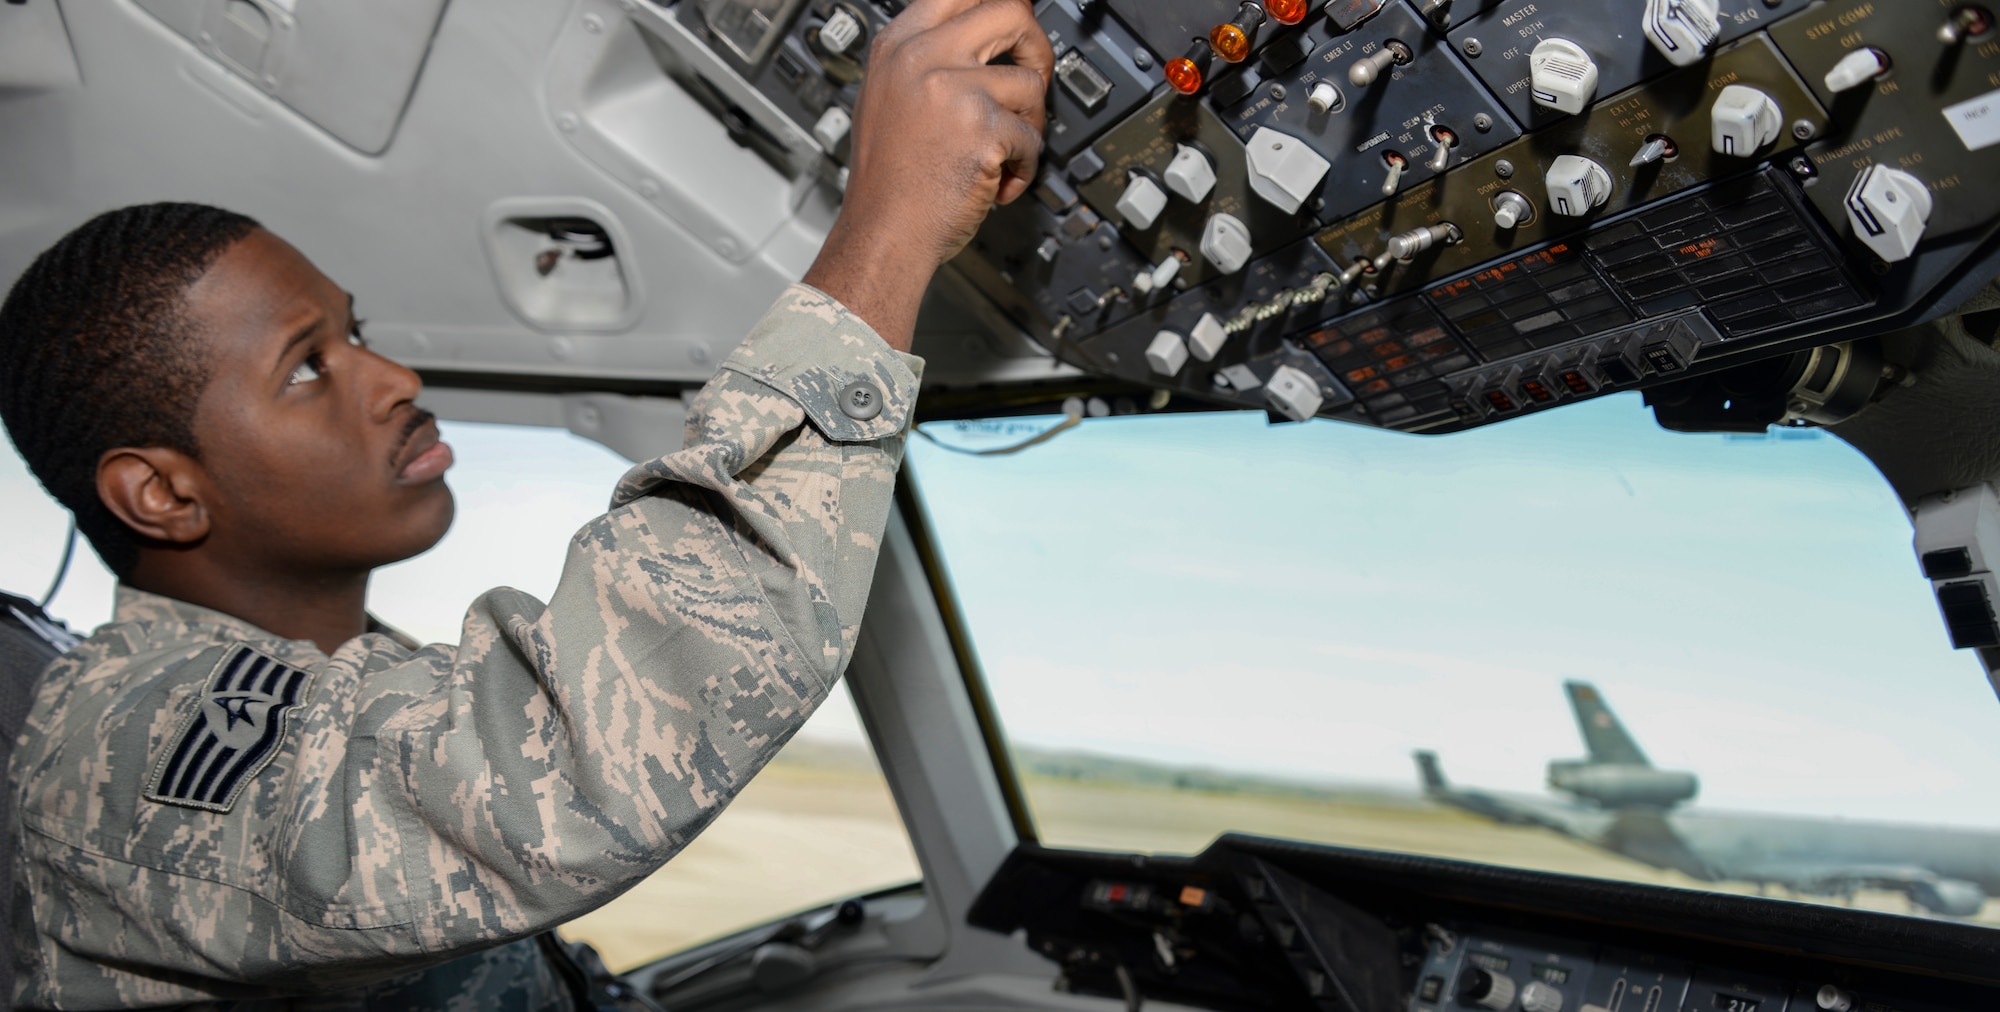 Staff Sgt. Terrell Cole, 660th Aircraft Maintenance Squadron communication/navigation mission systems craftsman, runs tests on the control panel of a KC-10 Extender at Travis Air Force Base, California. Cole troubleshoots aircraft discrepancies, repairs and inspects communication and navigation systems. (U.S. Air Force photo by Senior Airman Amber Carter)